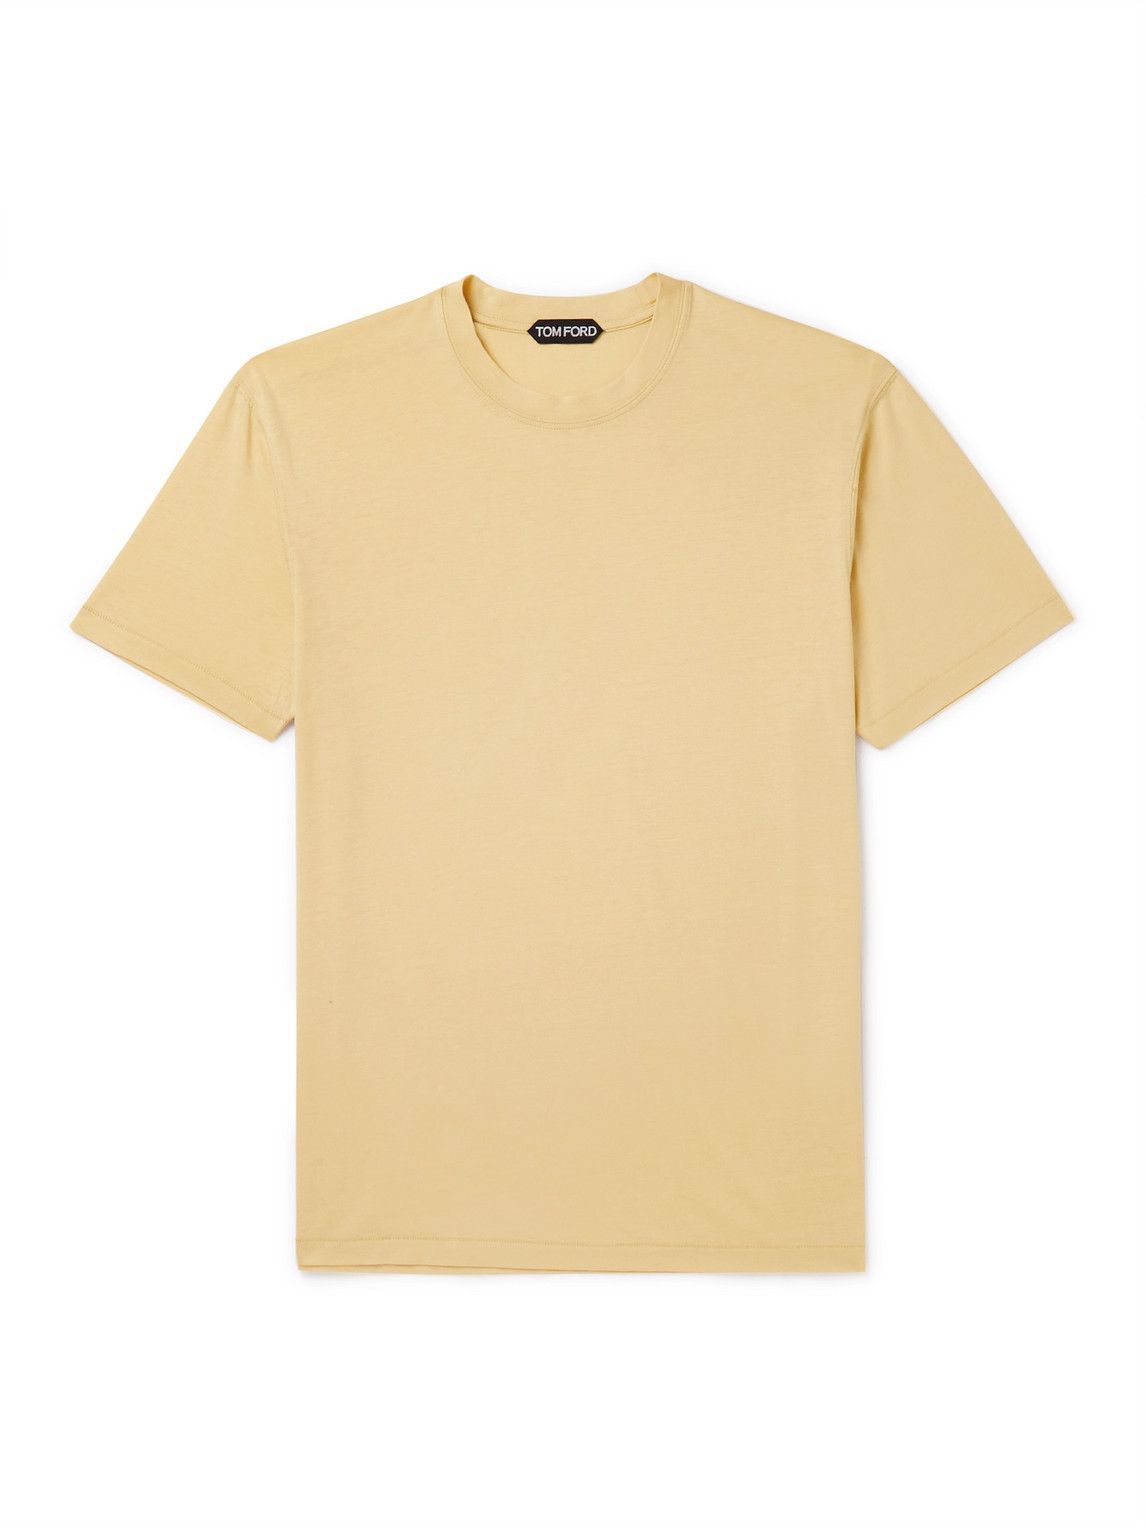 TOM FORD - Lyocell and Cotton-Blend Jersey T-Shirt - Yellow TOM FORD